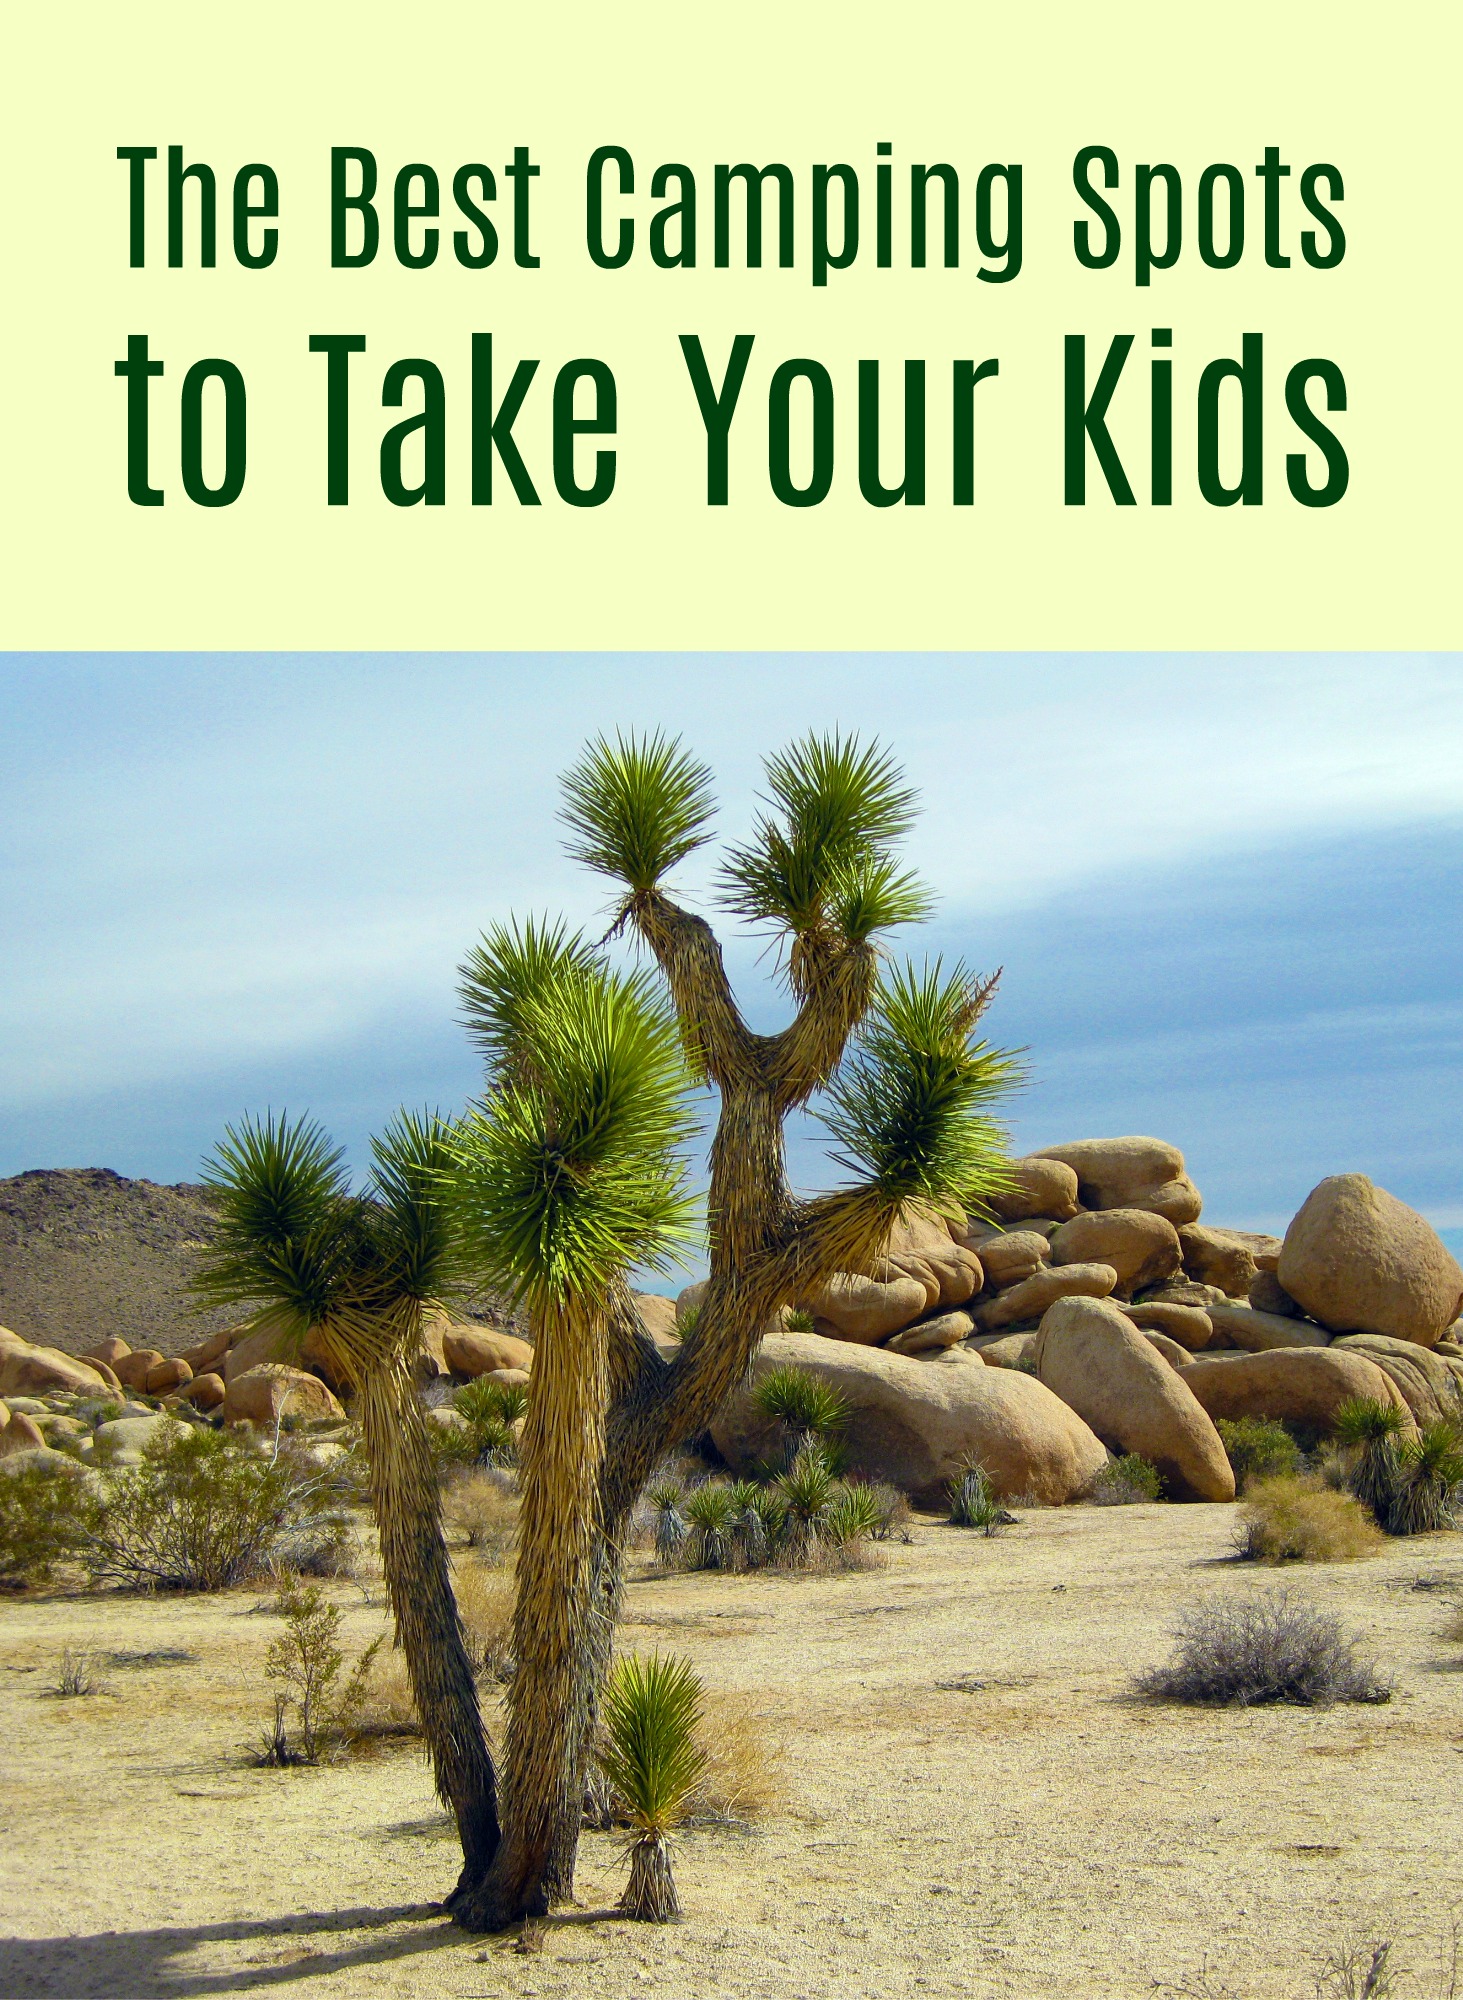 The Best Camping Spots to Take Your Kids